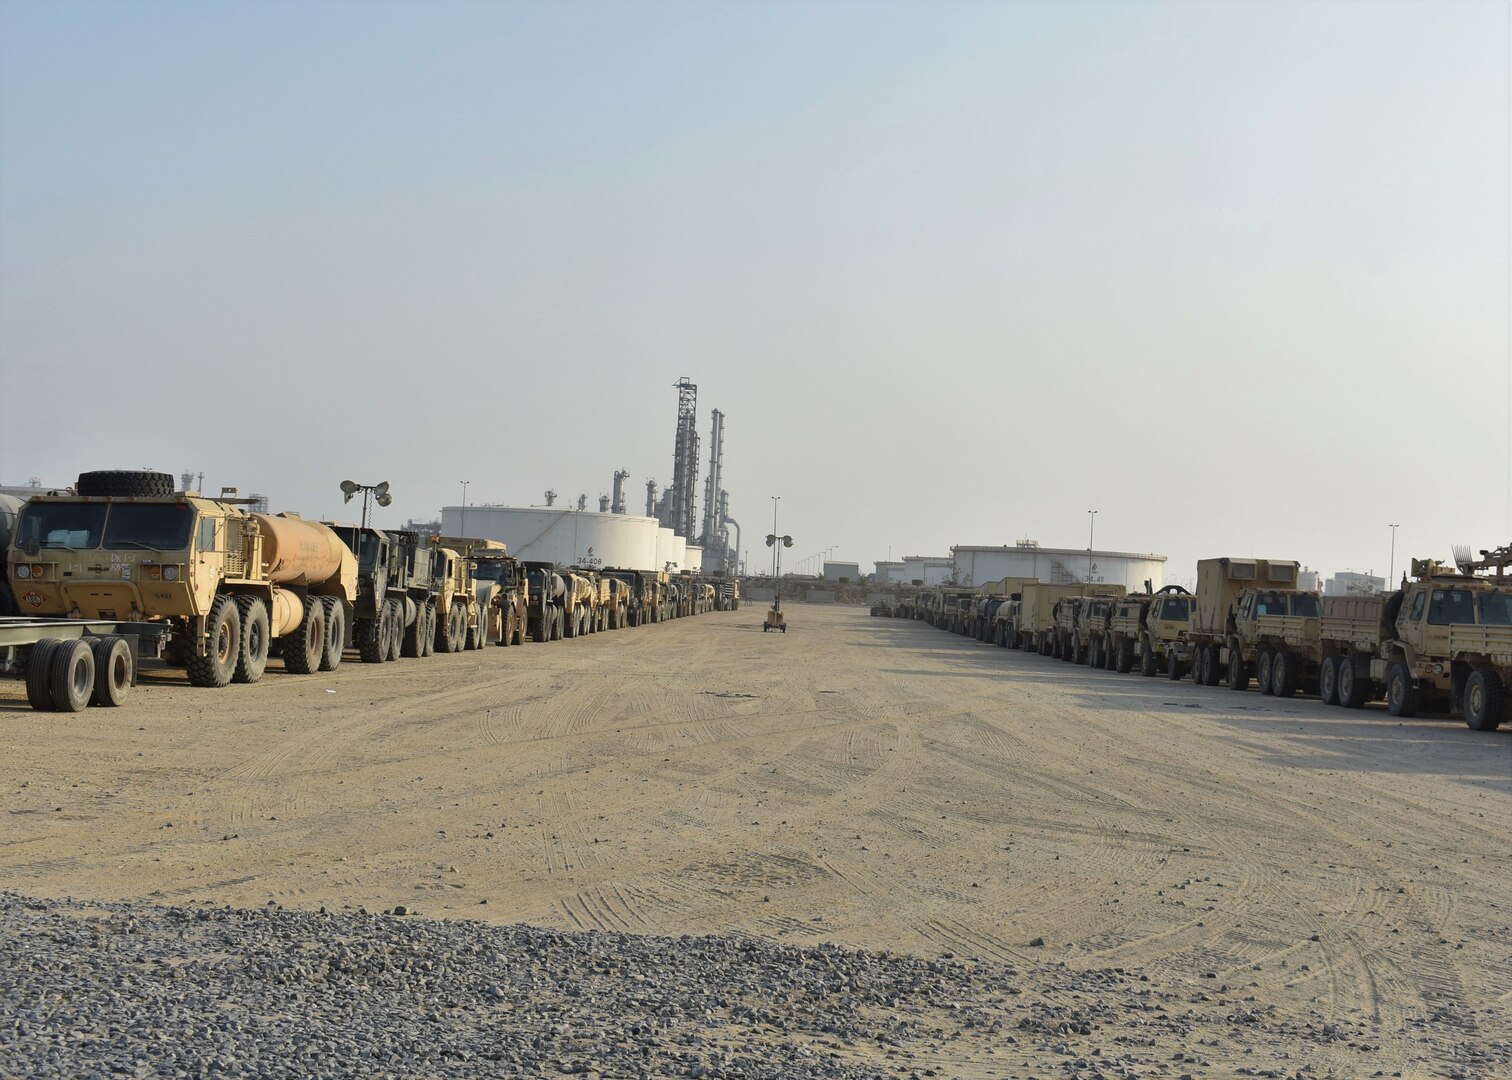 U.S. Soldiers in the 30th Armored Brigade Combat Team assist in the line-up and preparation of vehicles for movement to their base in Kuwait after being off-loaded from ships at Shuaiba Port, Kuwait, Oct. 21-25, 2019.  The unit is mobilized to support Operation Spartan Shield and is comprised of units from the North Carolina, South Carolina, Ohio and West Virginia Army National Guard.